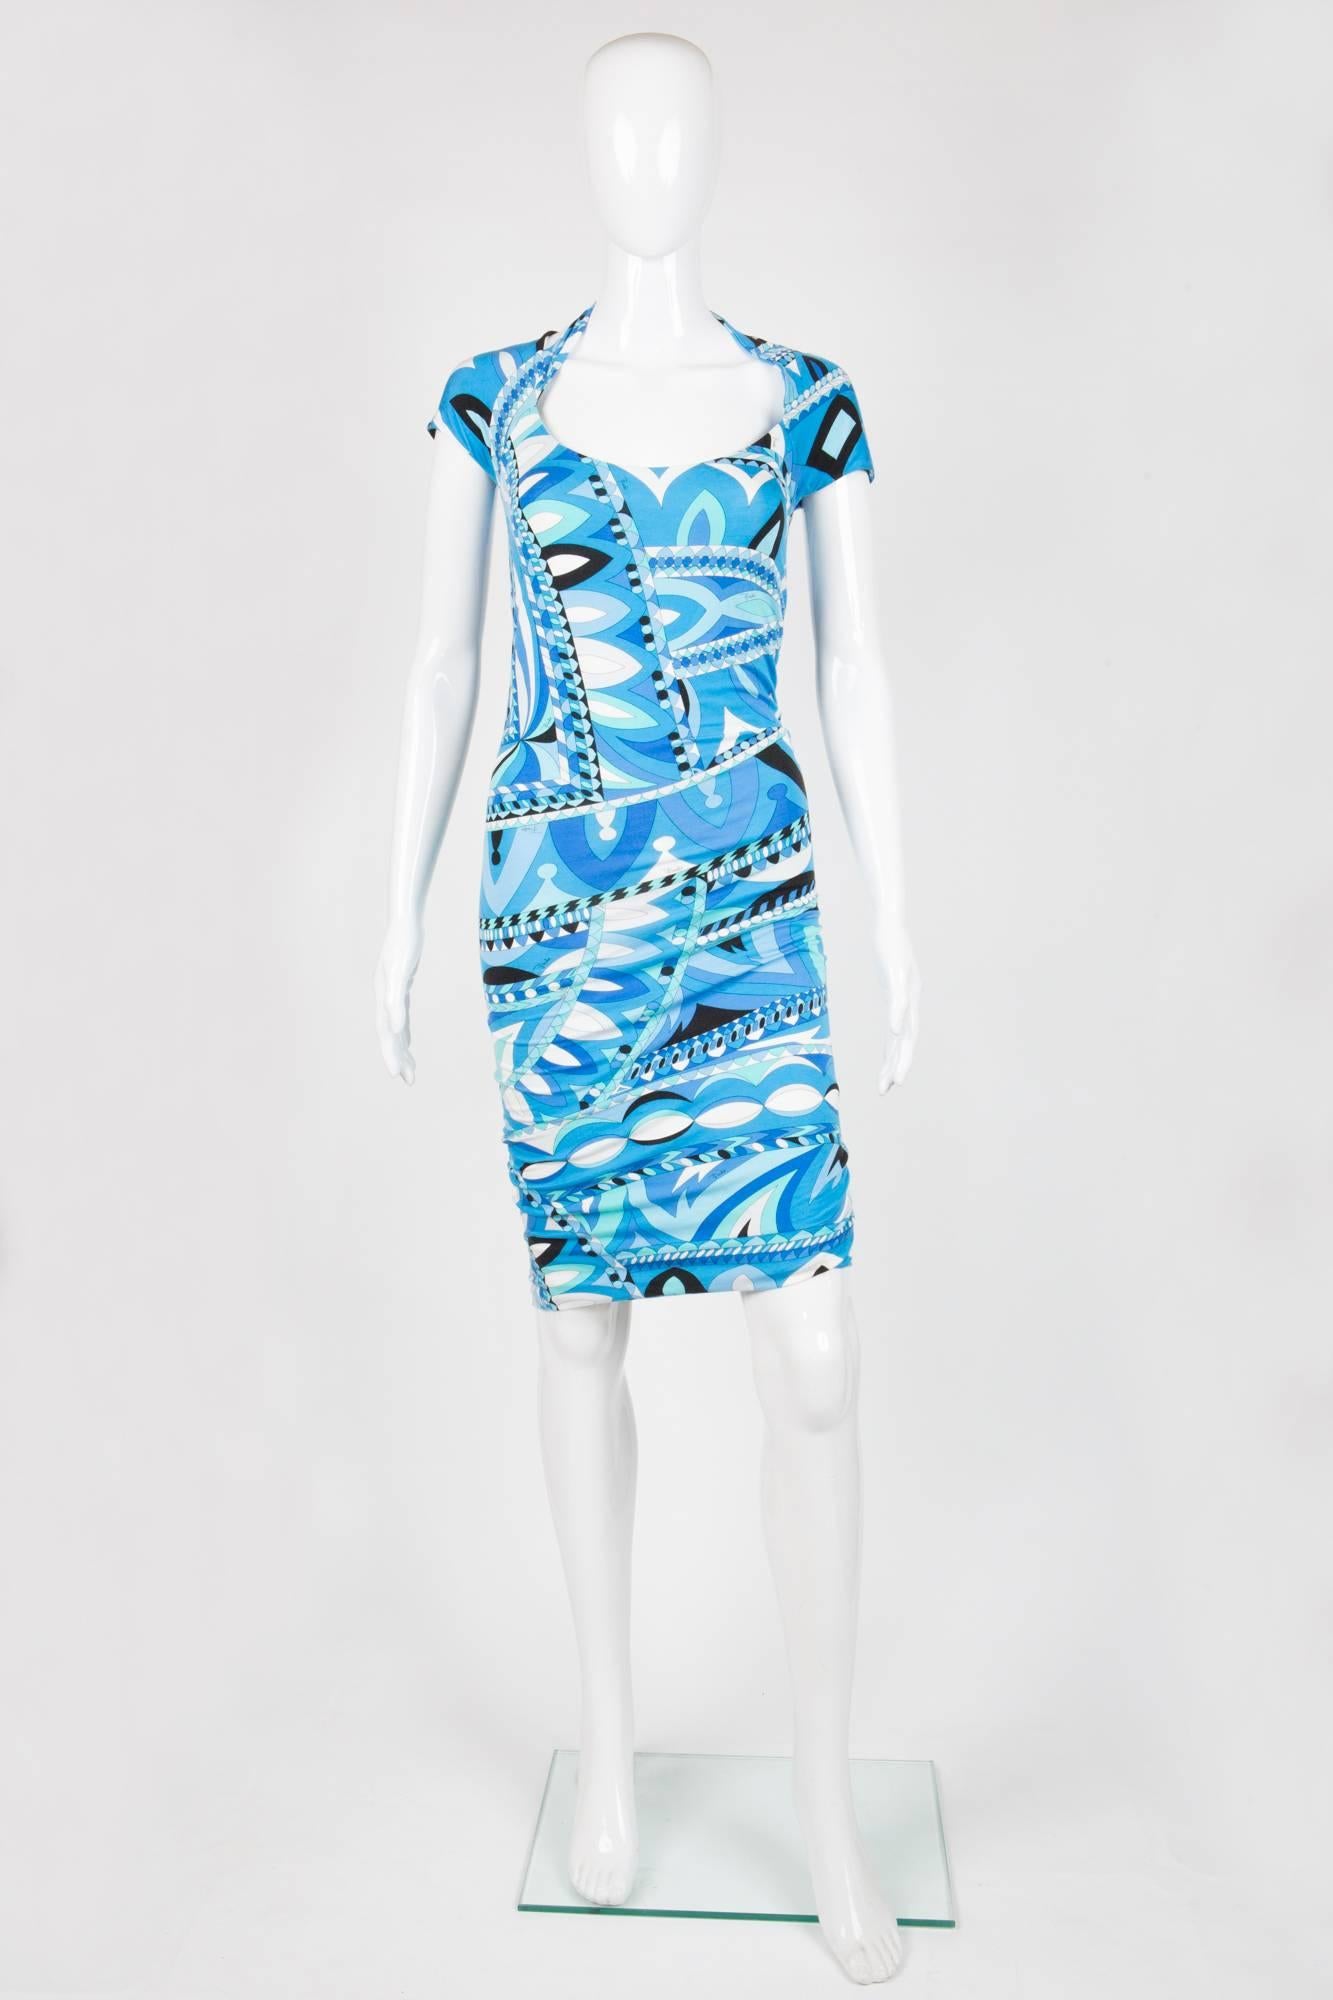 Emilio Pucci blue turquoise silk jersey dress featuring a graphic patterns Pattern and cut of the dress are emblematic of the psychedelic art and style of the 1970s, a low back with a gathered center back for a perfect fits, with a full white